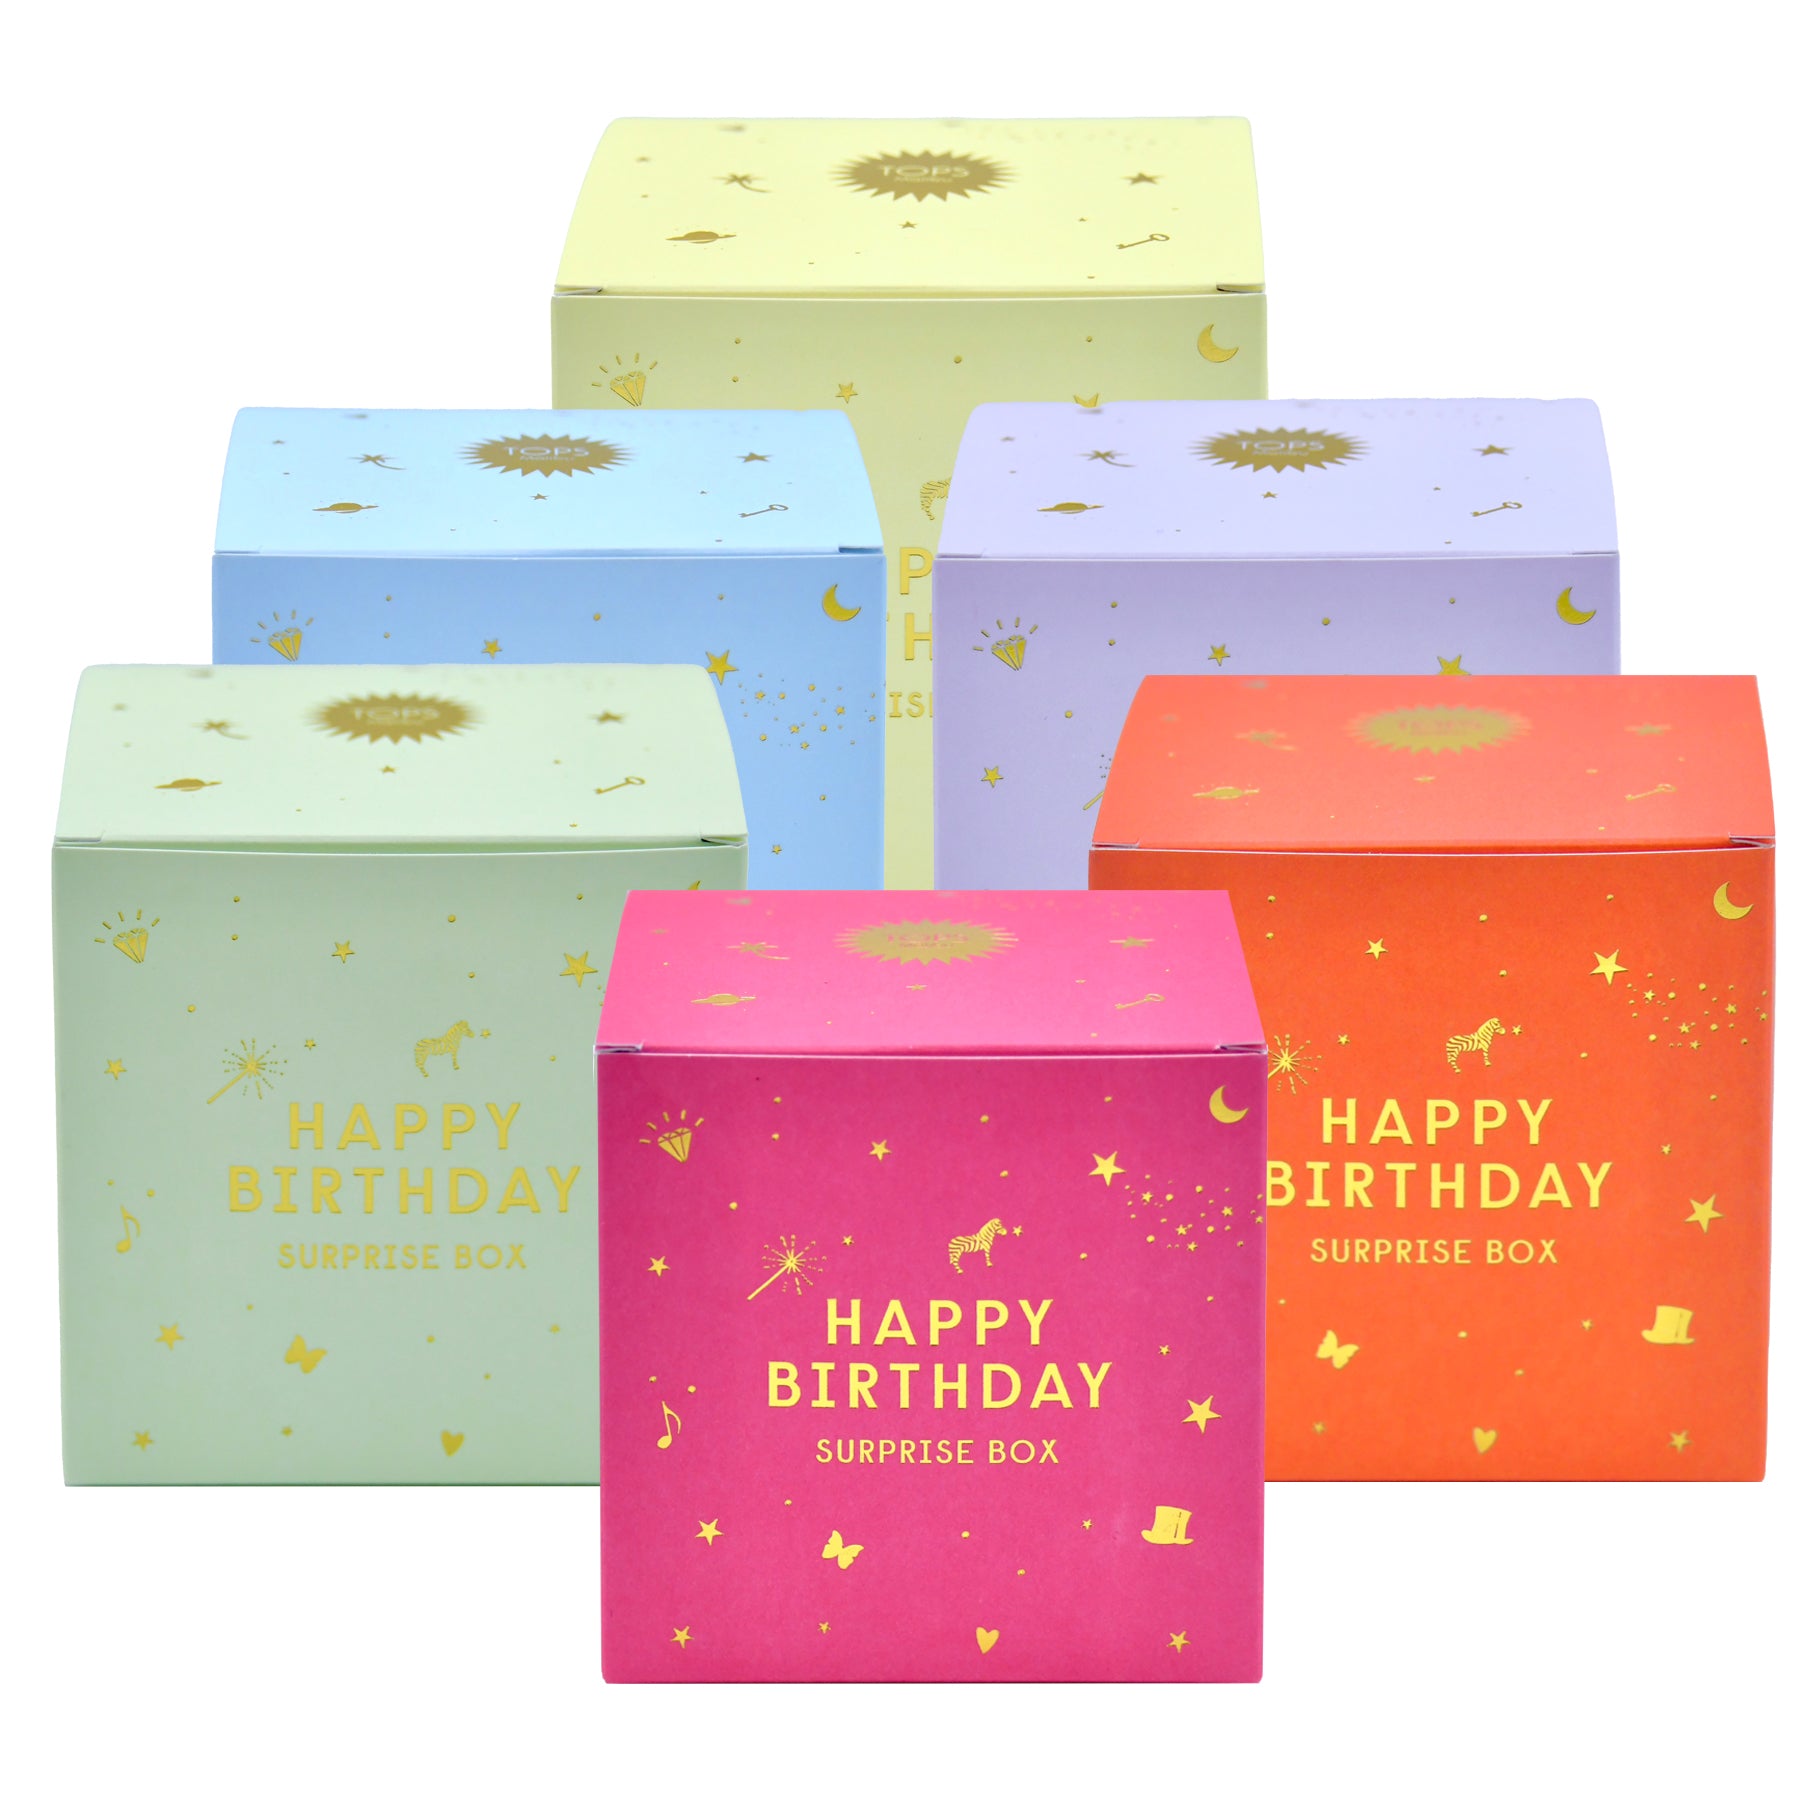 Creative Birthday Gifts for Friends – Fun-Squared